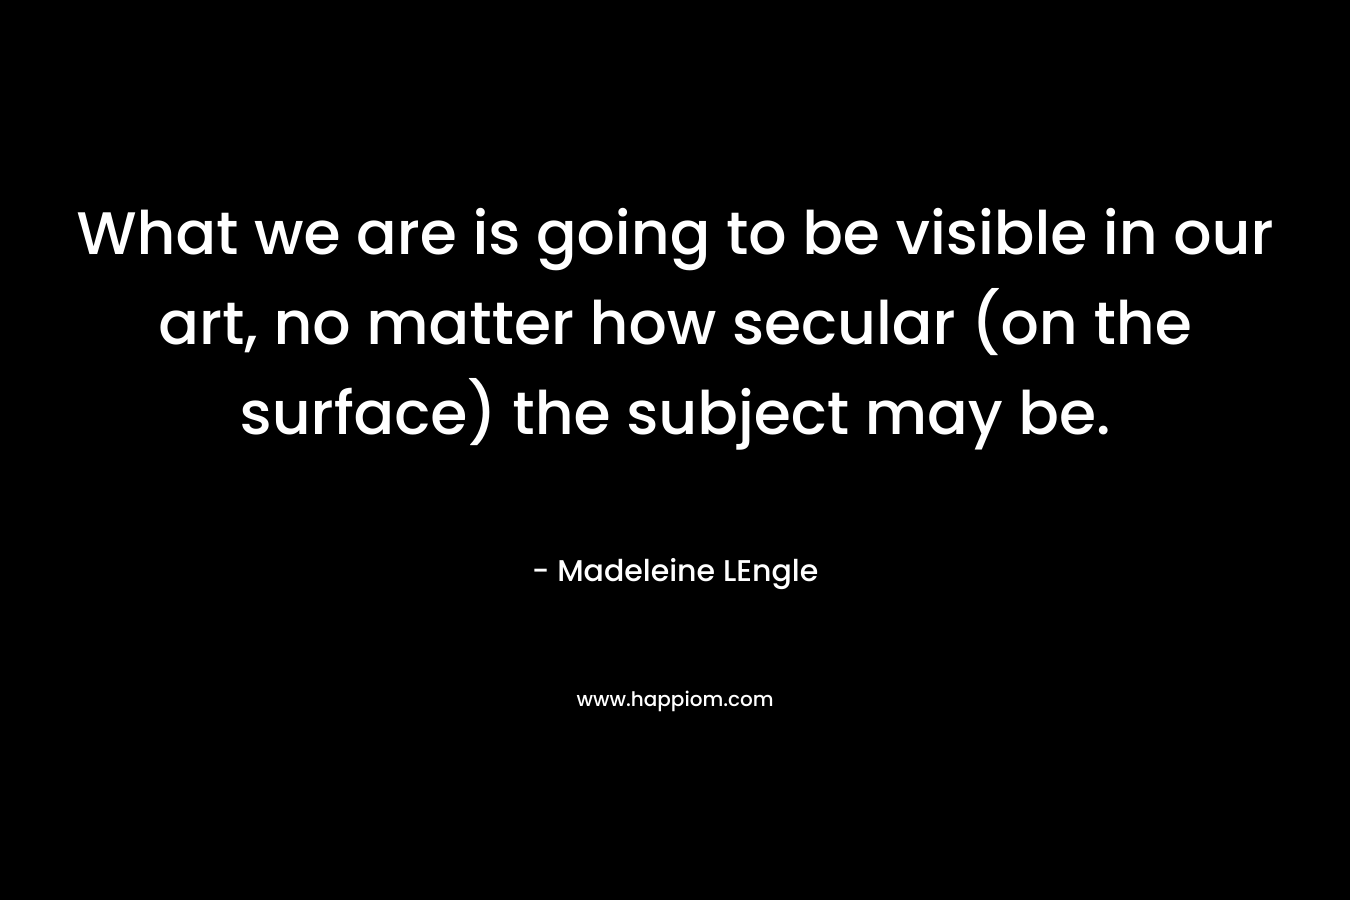 What we are is going to be visible in our art, no matter how secular (on the surface) the subject may be.